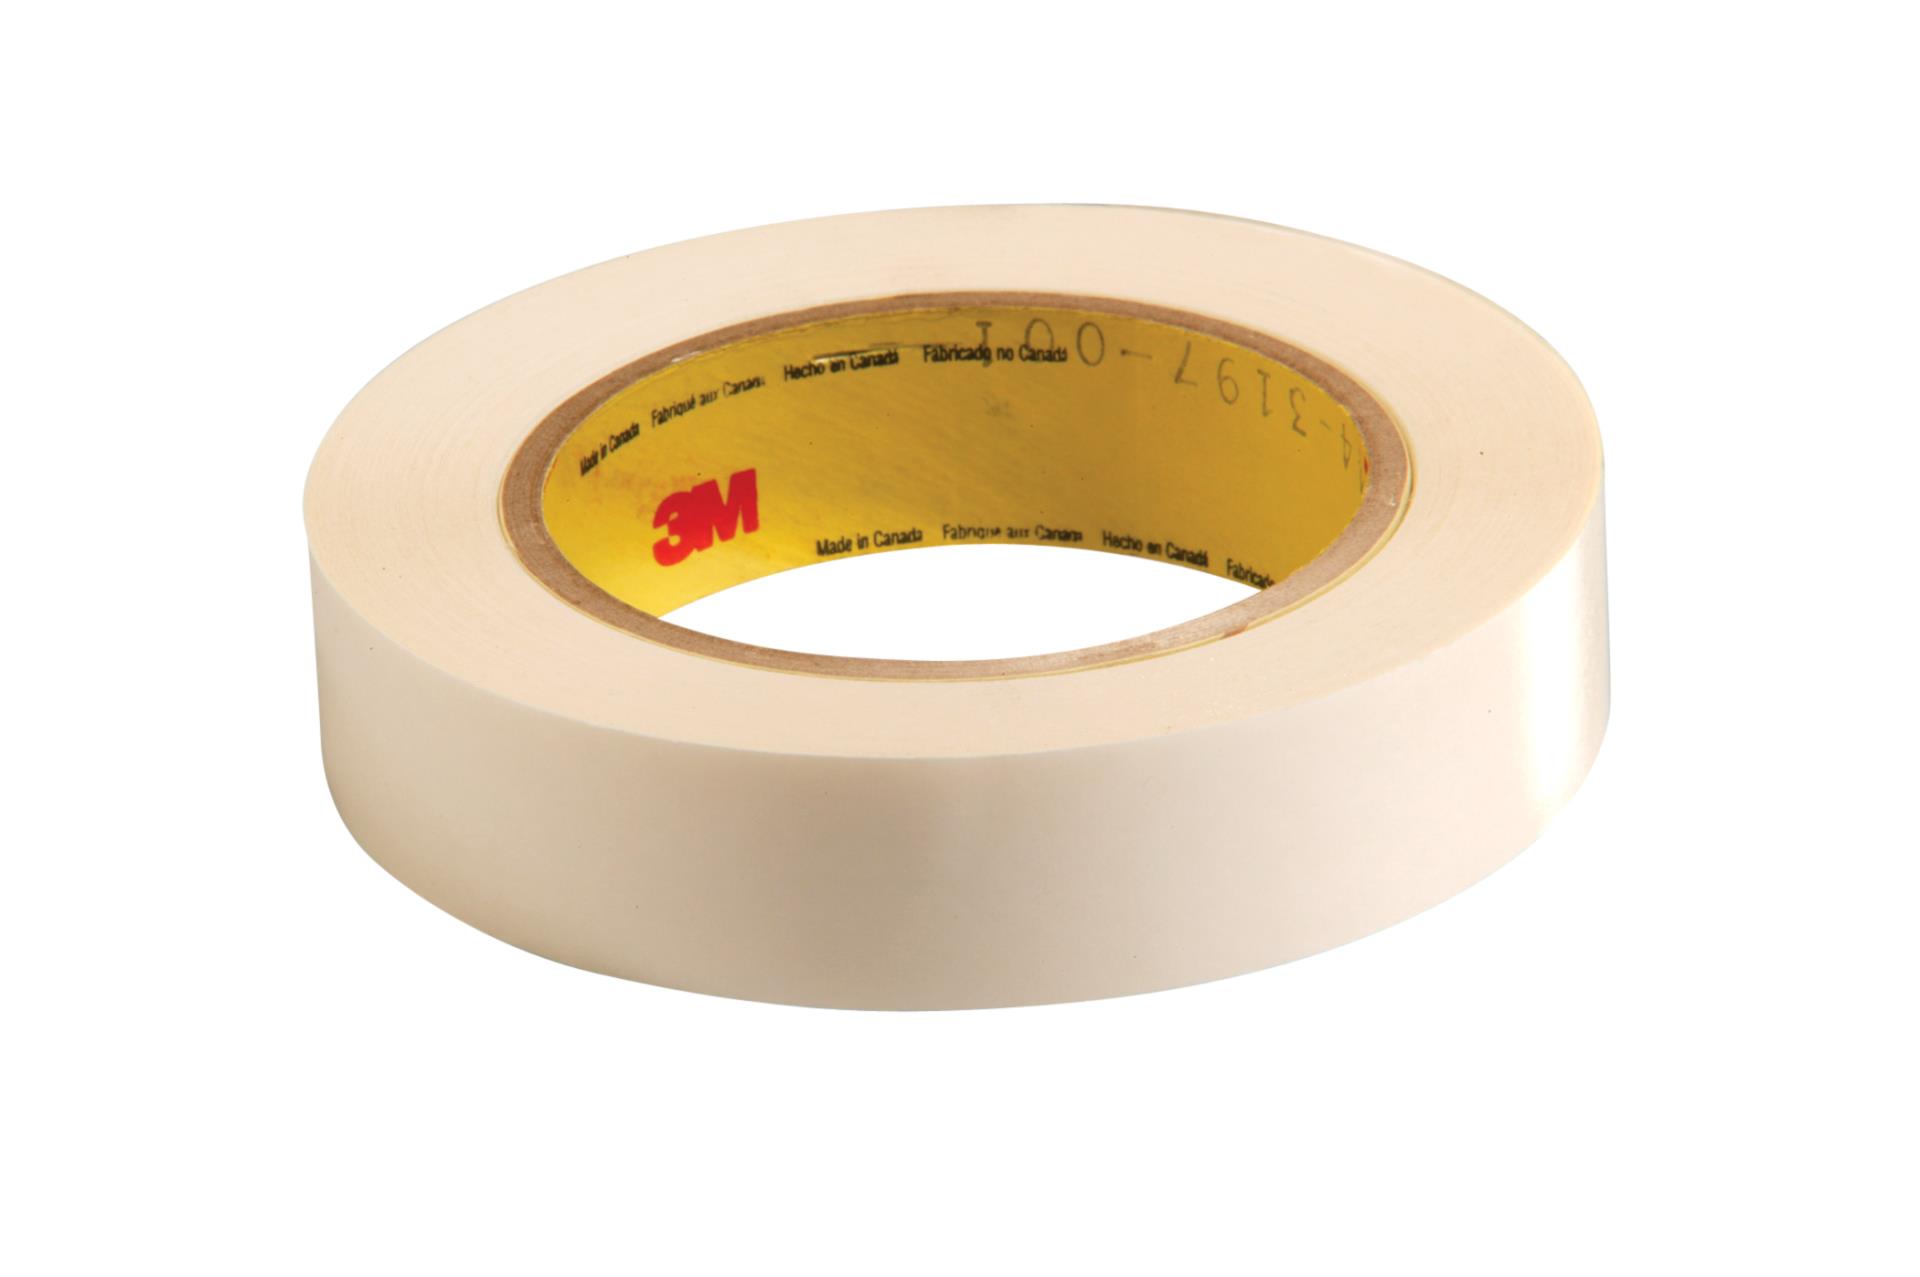 3M 410M Double Sided Masking Tape 1/2 x 36 yard Roll (72 Roll/Case)